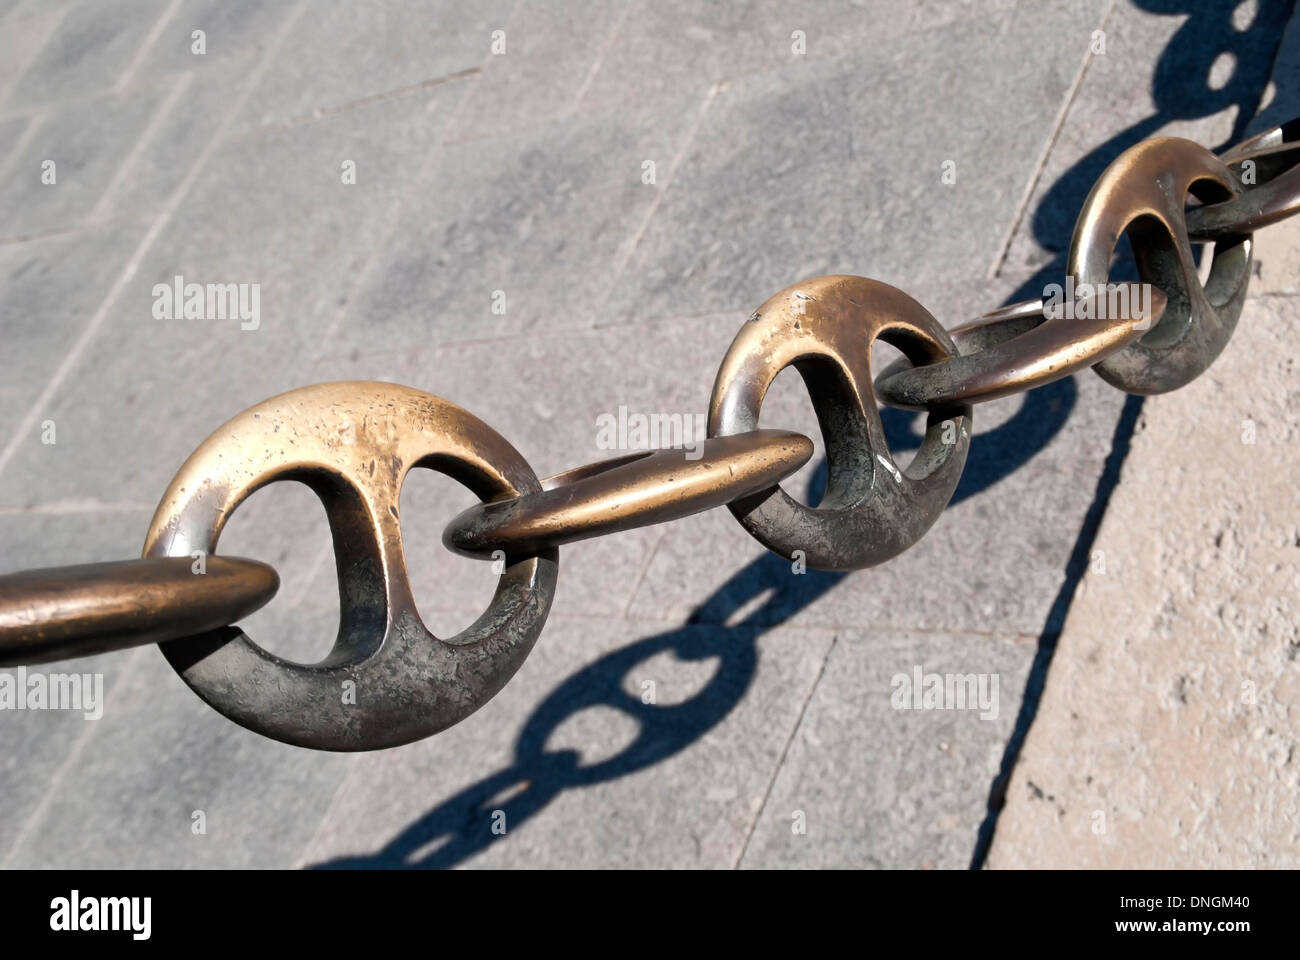 Chain, protected area Stock Photo